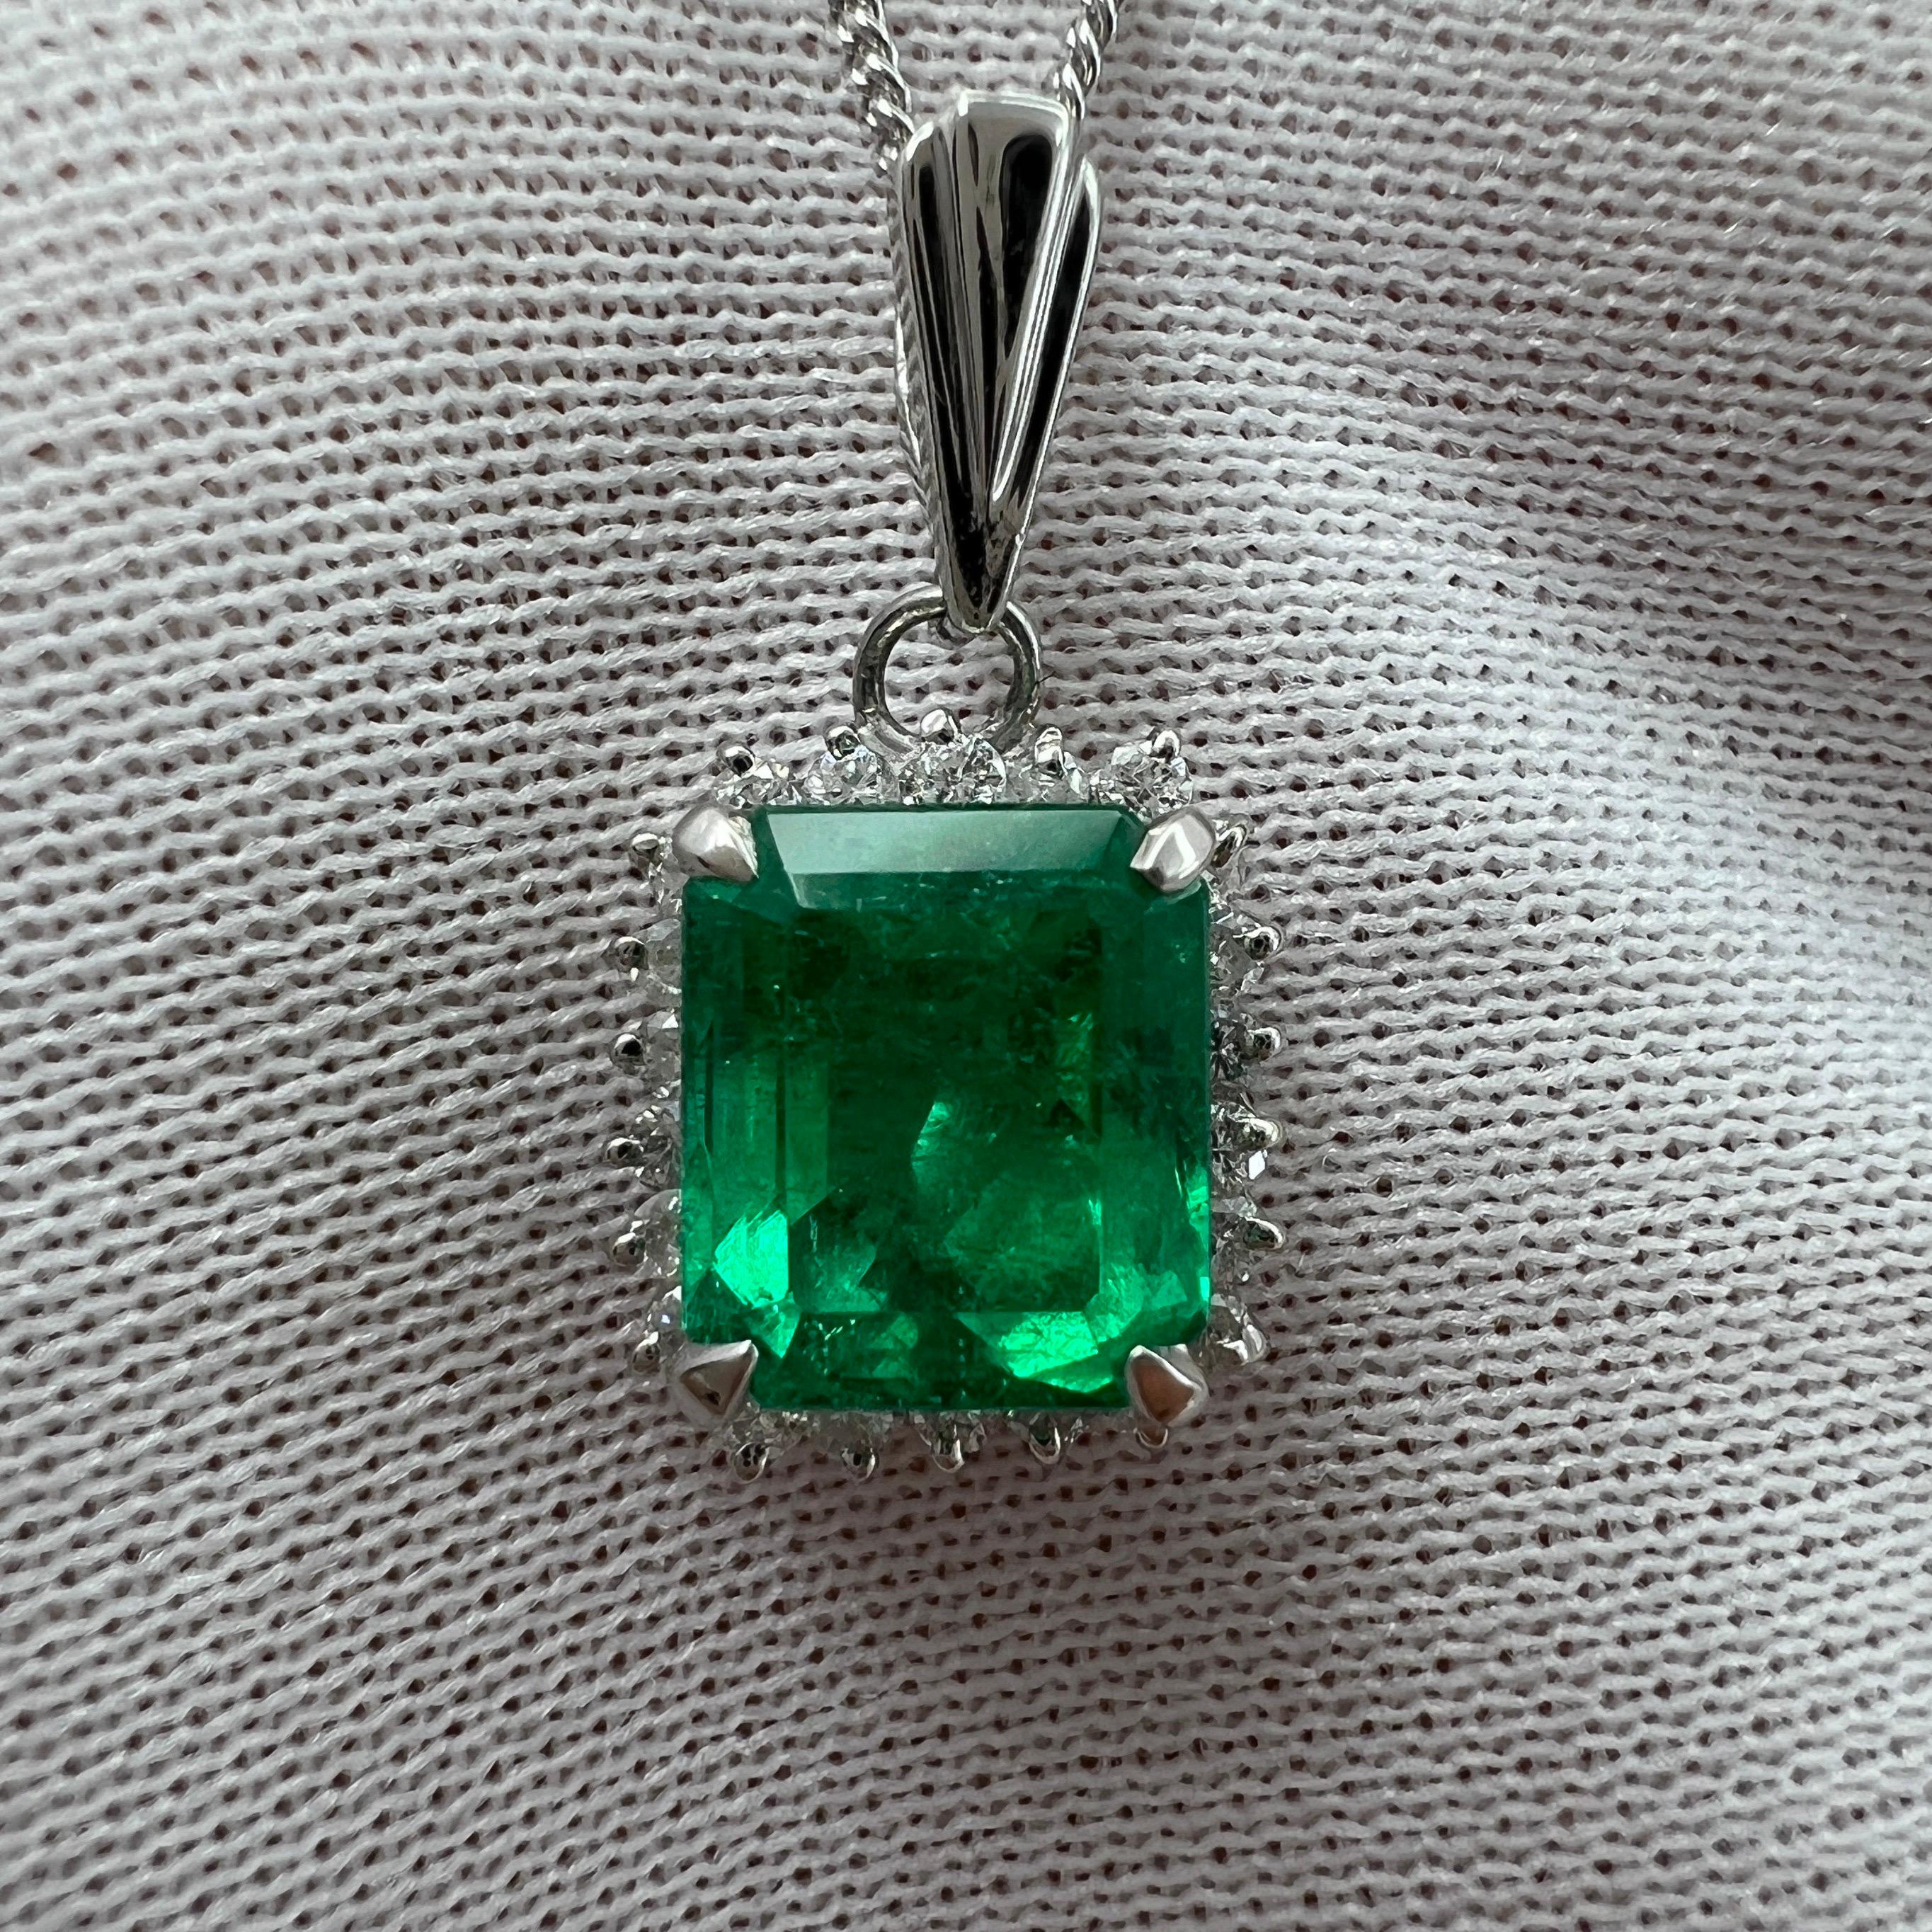 Natural Vivid Green Colombian Emerald & Diamond Platinum Halo Pendant Necklace.

1.61 Carat Colombian emerald with a fine, vivid green colour and very good clarity. Some small natural inclusions visible when looking closely (as expected with